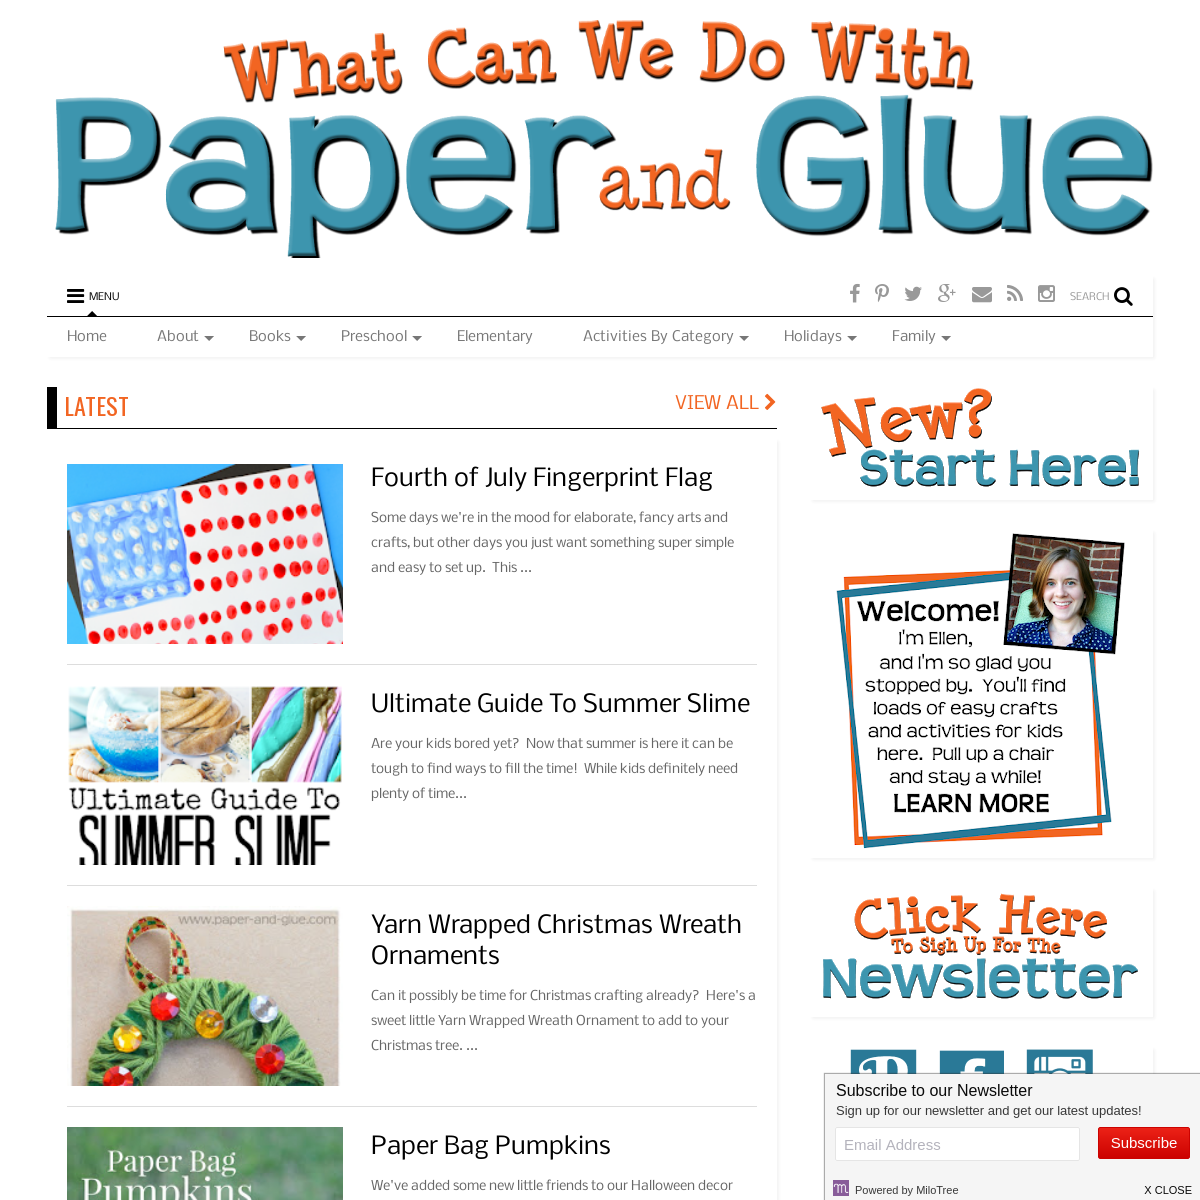 A complete backup of paper-and-glue.com